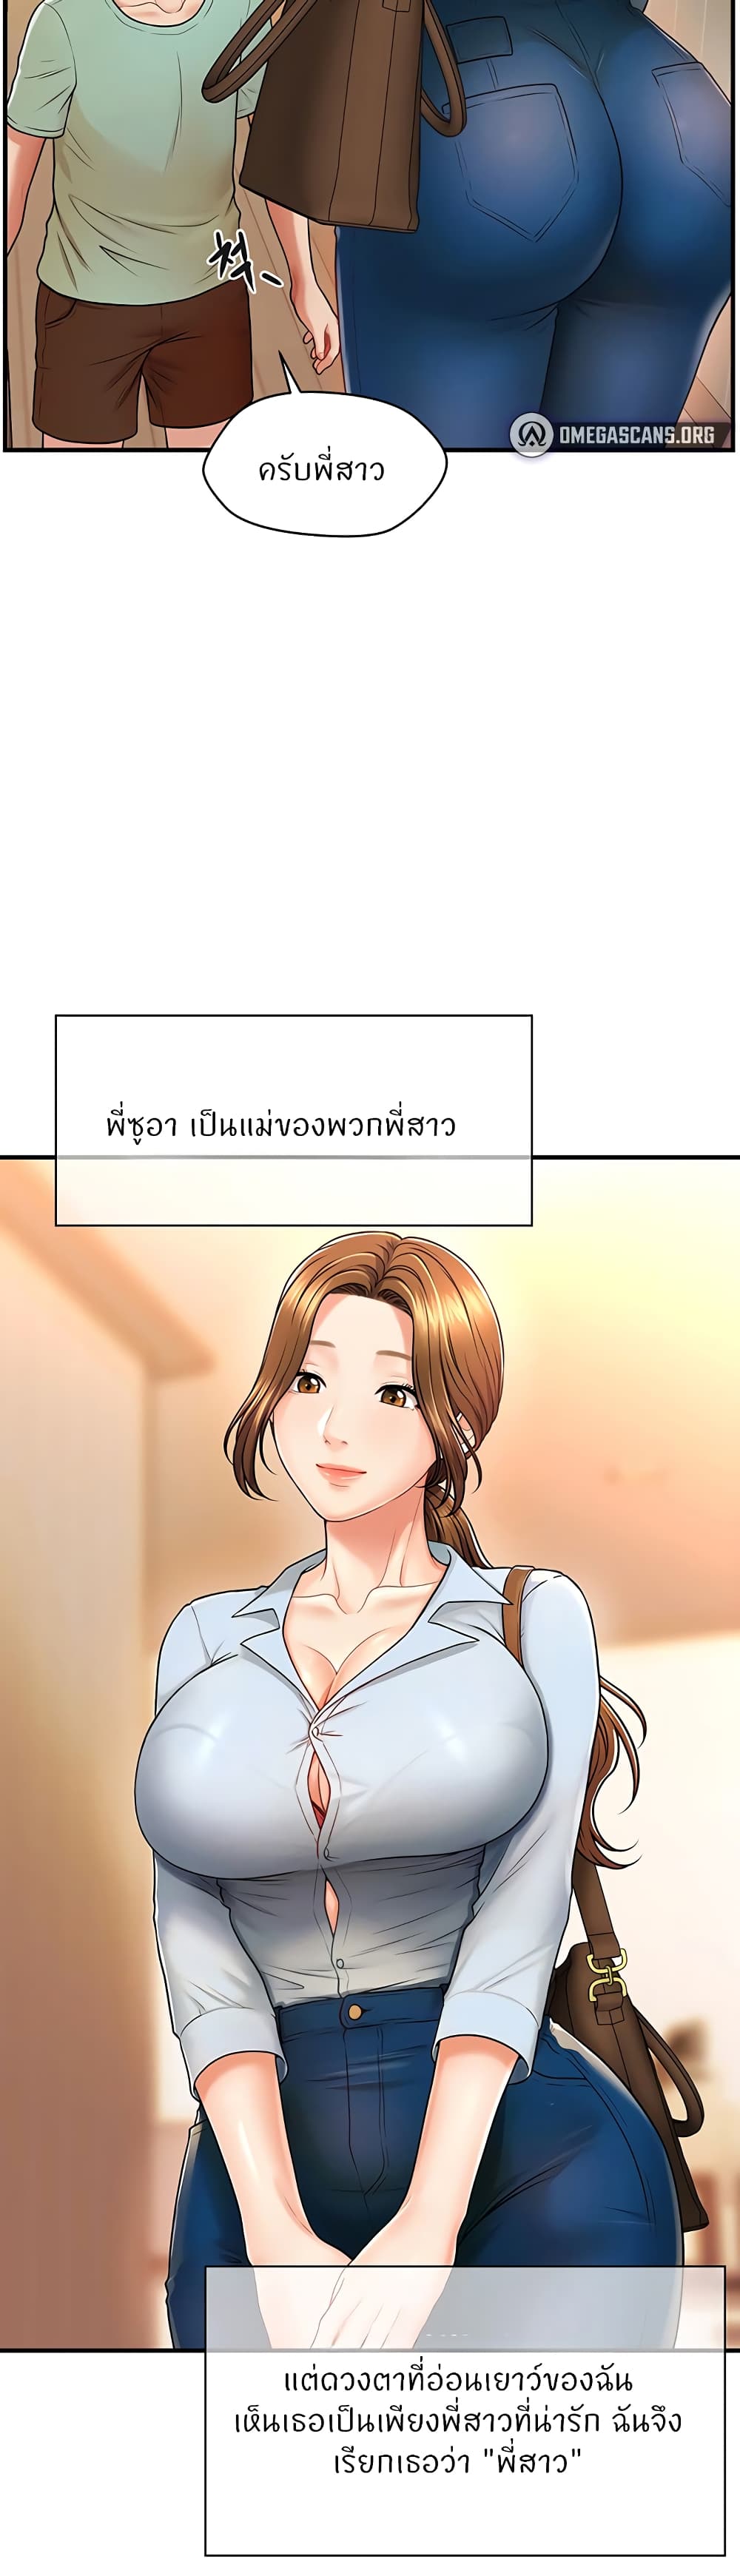 How to Conquer Women with Hypnosis ตอนที่ 1 ภาพ 4